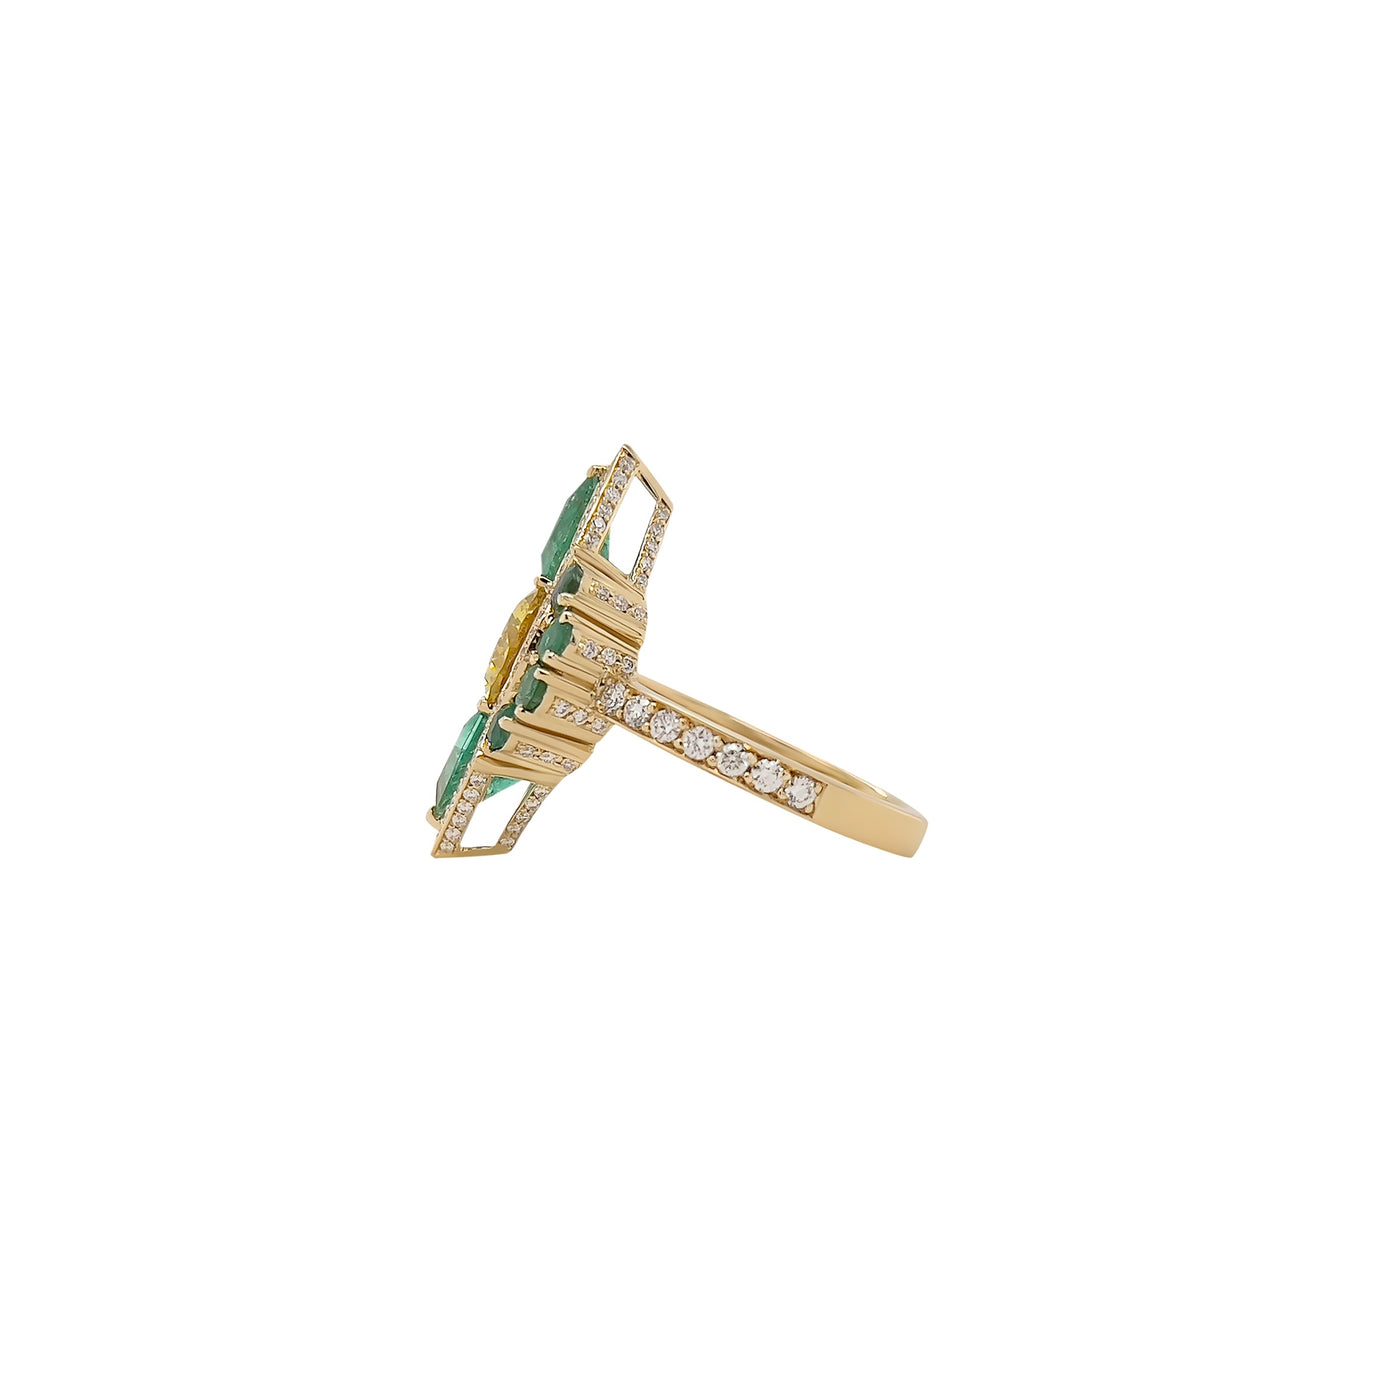 Yellow Sapphire and Emerald Ring